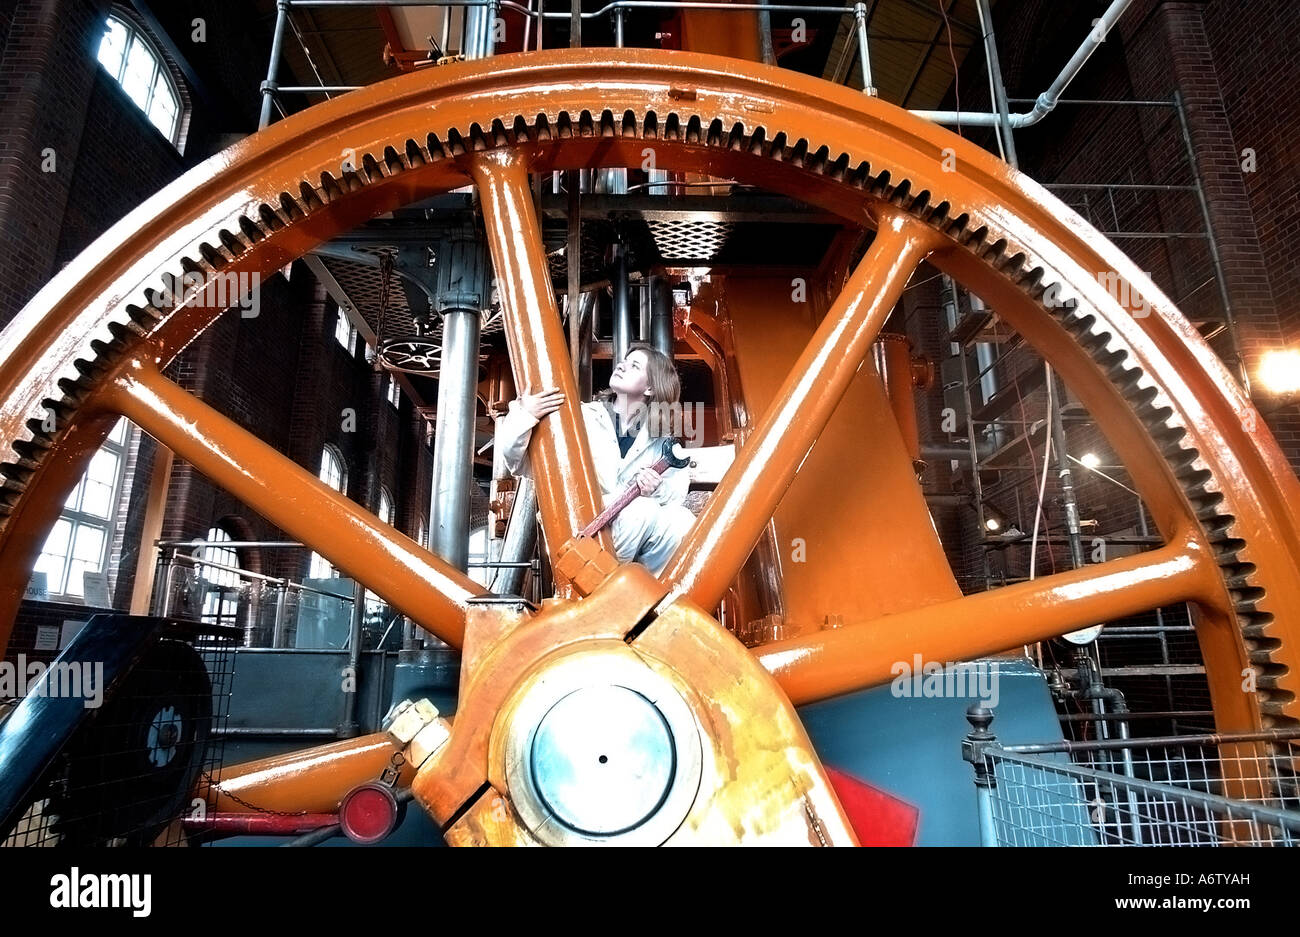 Southern Water apprentice Caroline Gardiner examines the flywheel of a 99 year old Tangye 420hp steam driven pumping engine. Stock Photo